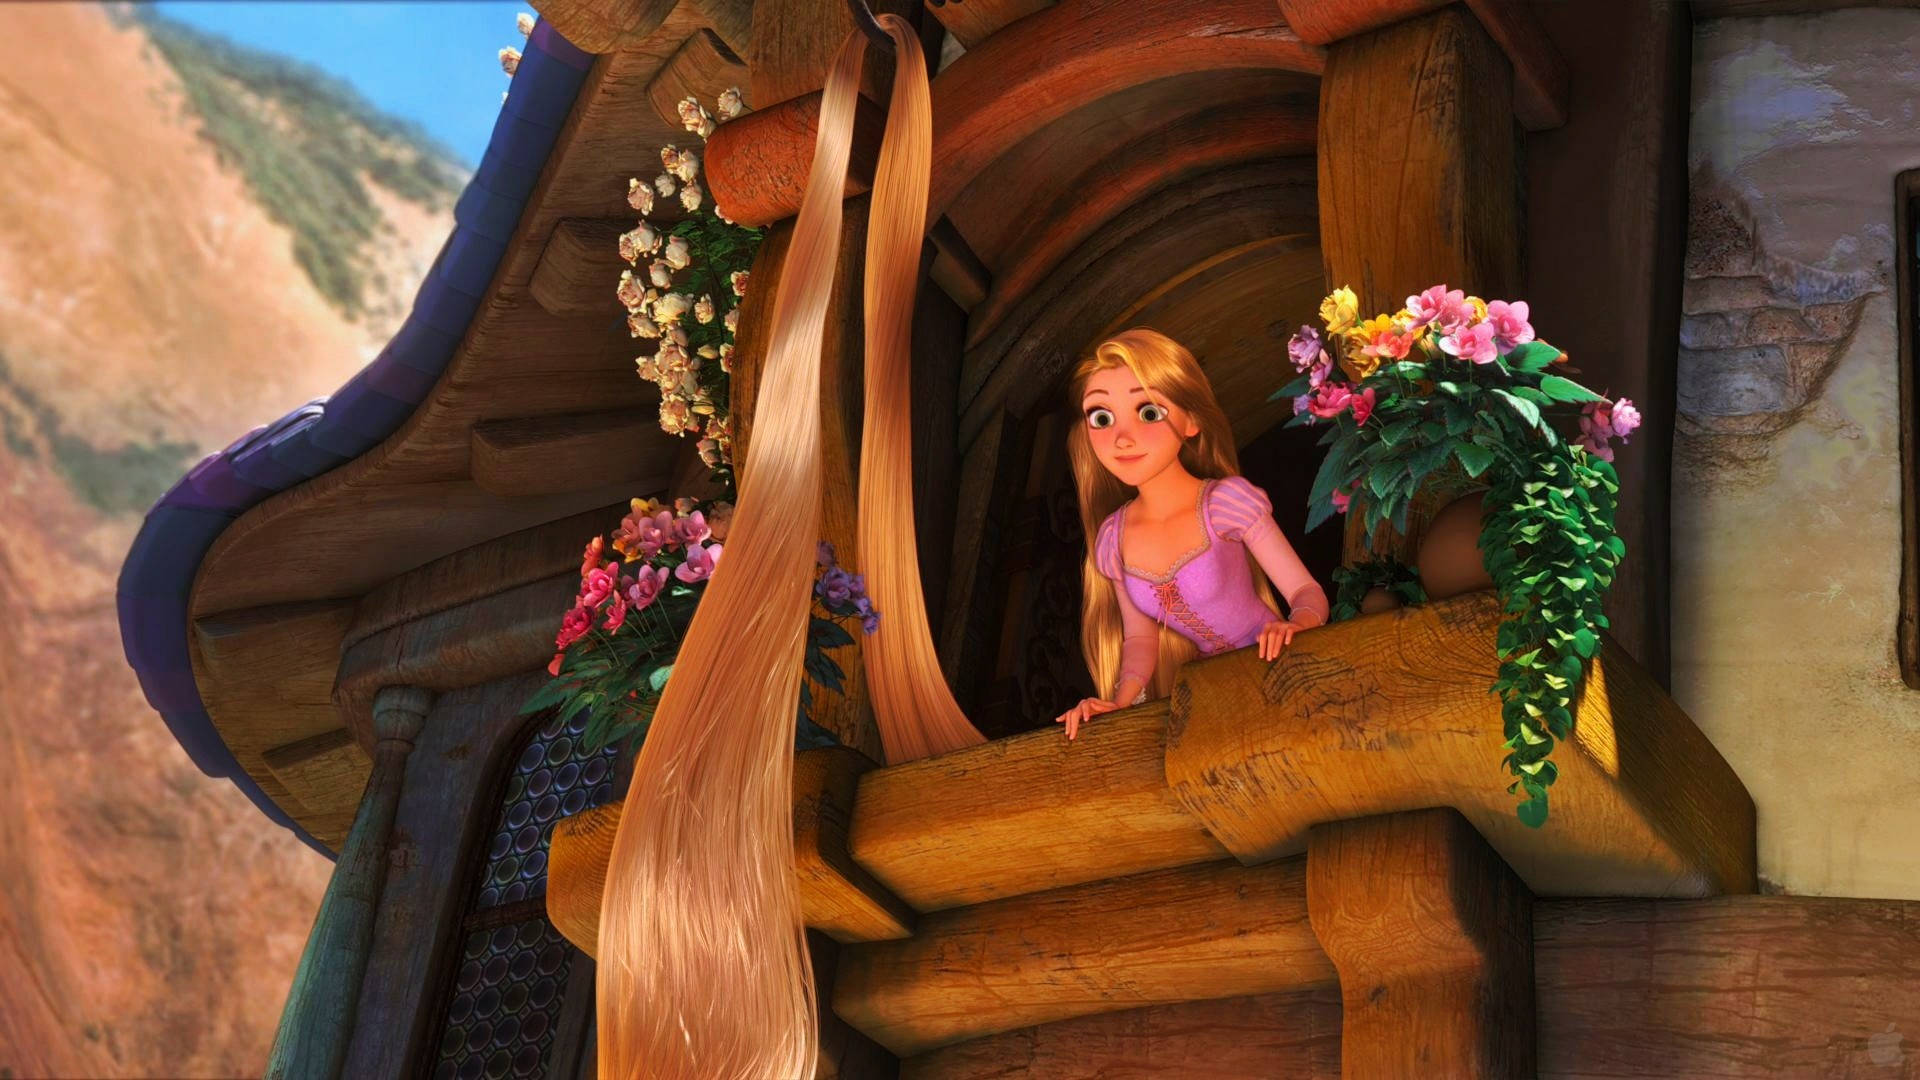 Rapunzel patiently awaits her rescue at her tower window. Wallpaper